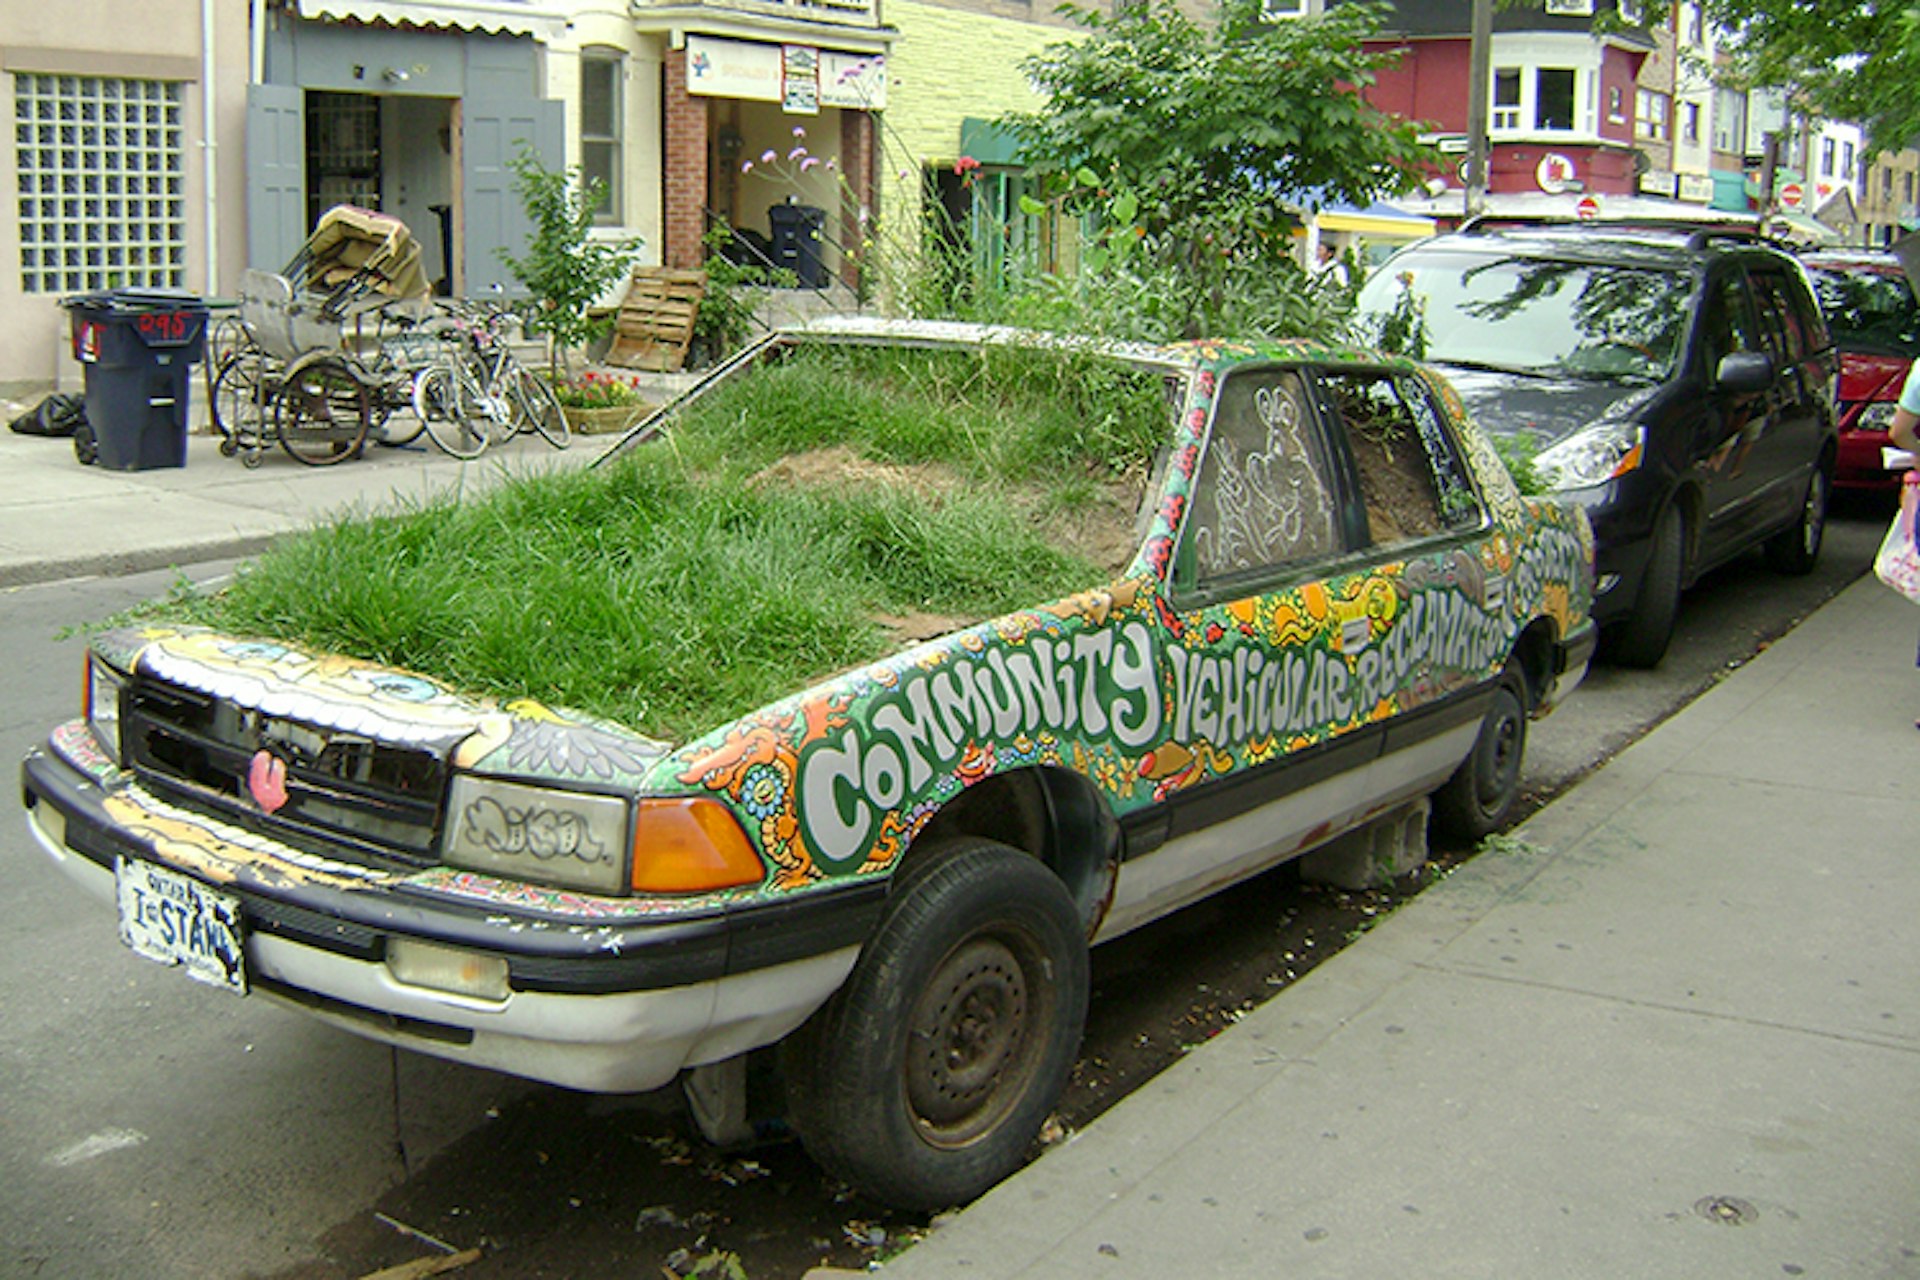 Part of the Community Vehicular Reclamation Project in Kensington Market. Image by Brie79 / CC BY-ND 2.0 